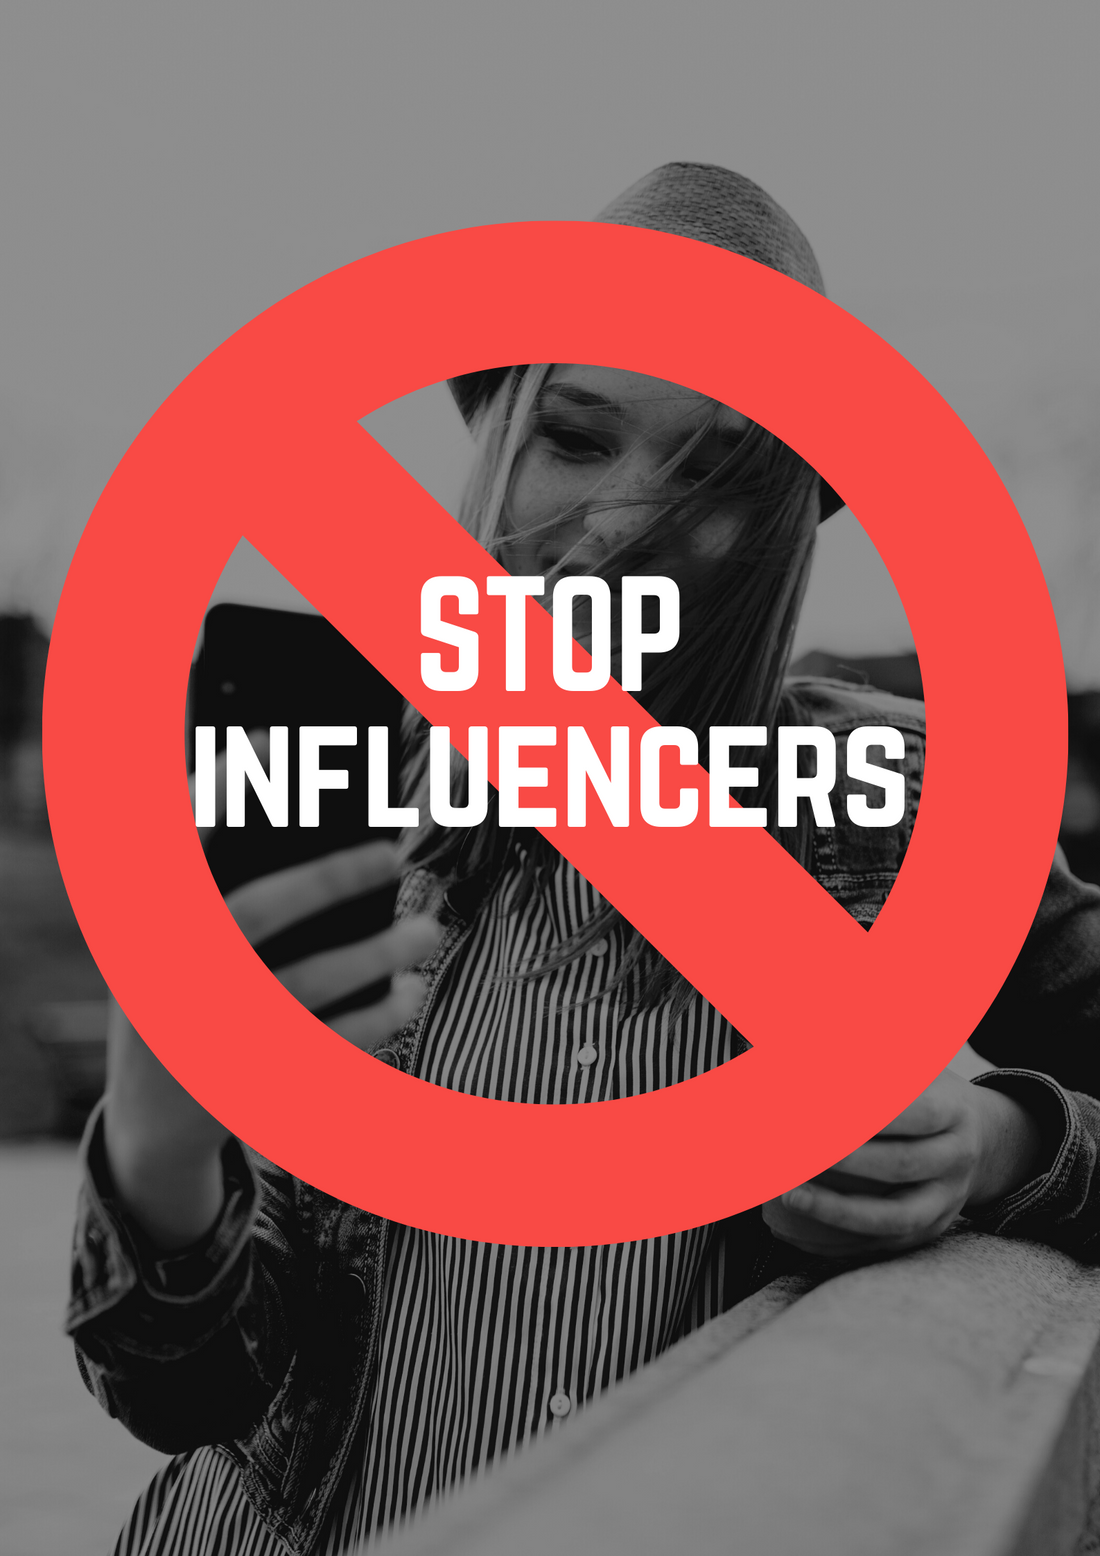 We Denounce Influencers